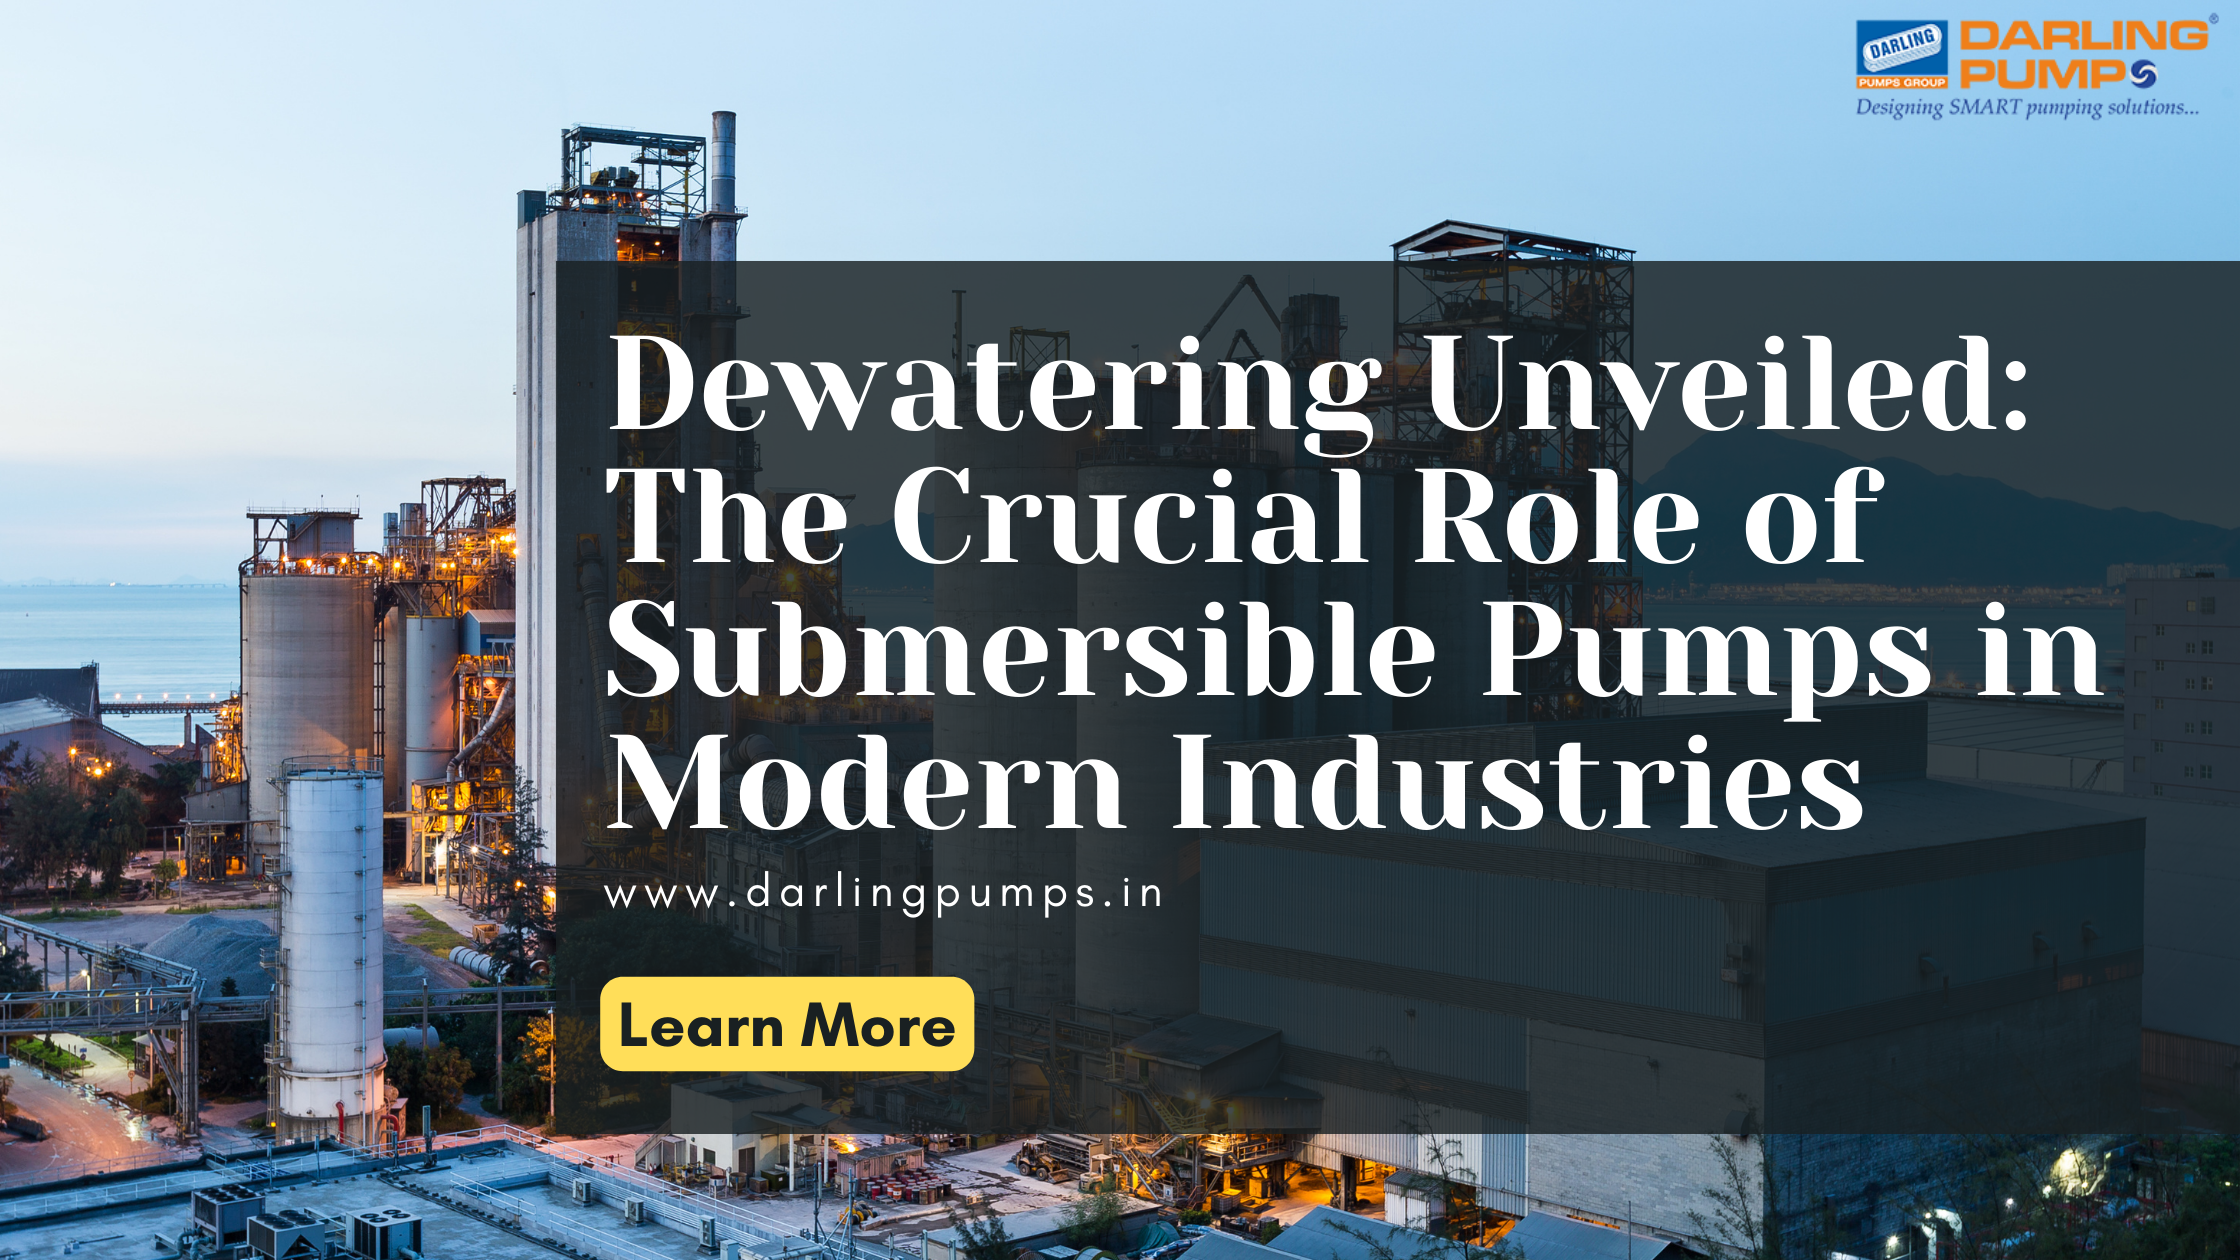 Dewatering Unveiled: The Crucial Role of Submersible Pumps in Modern Industries